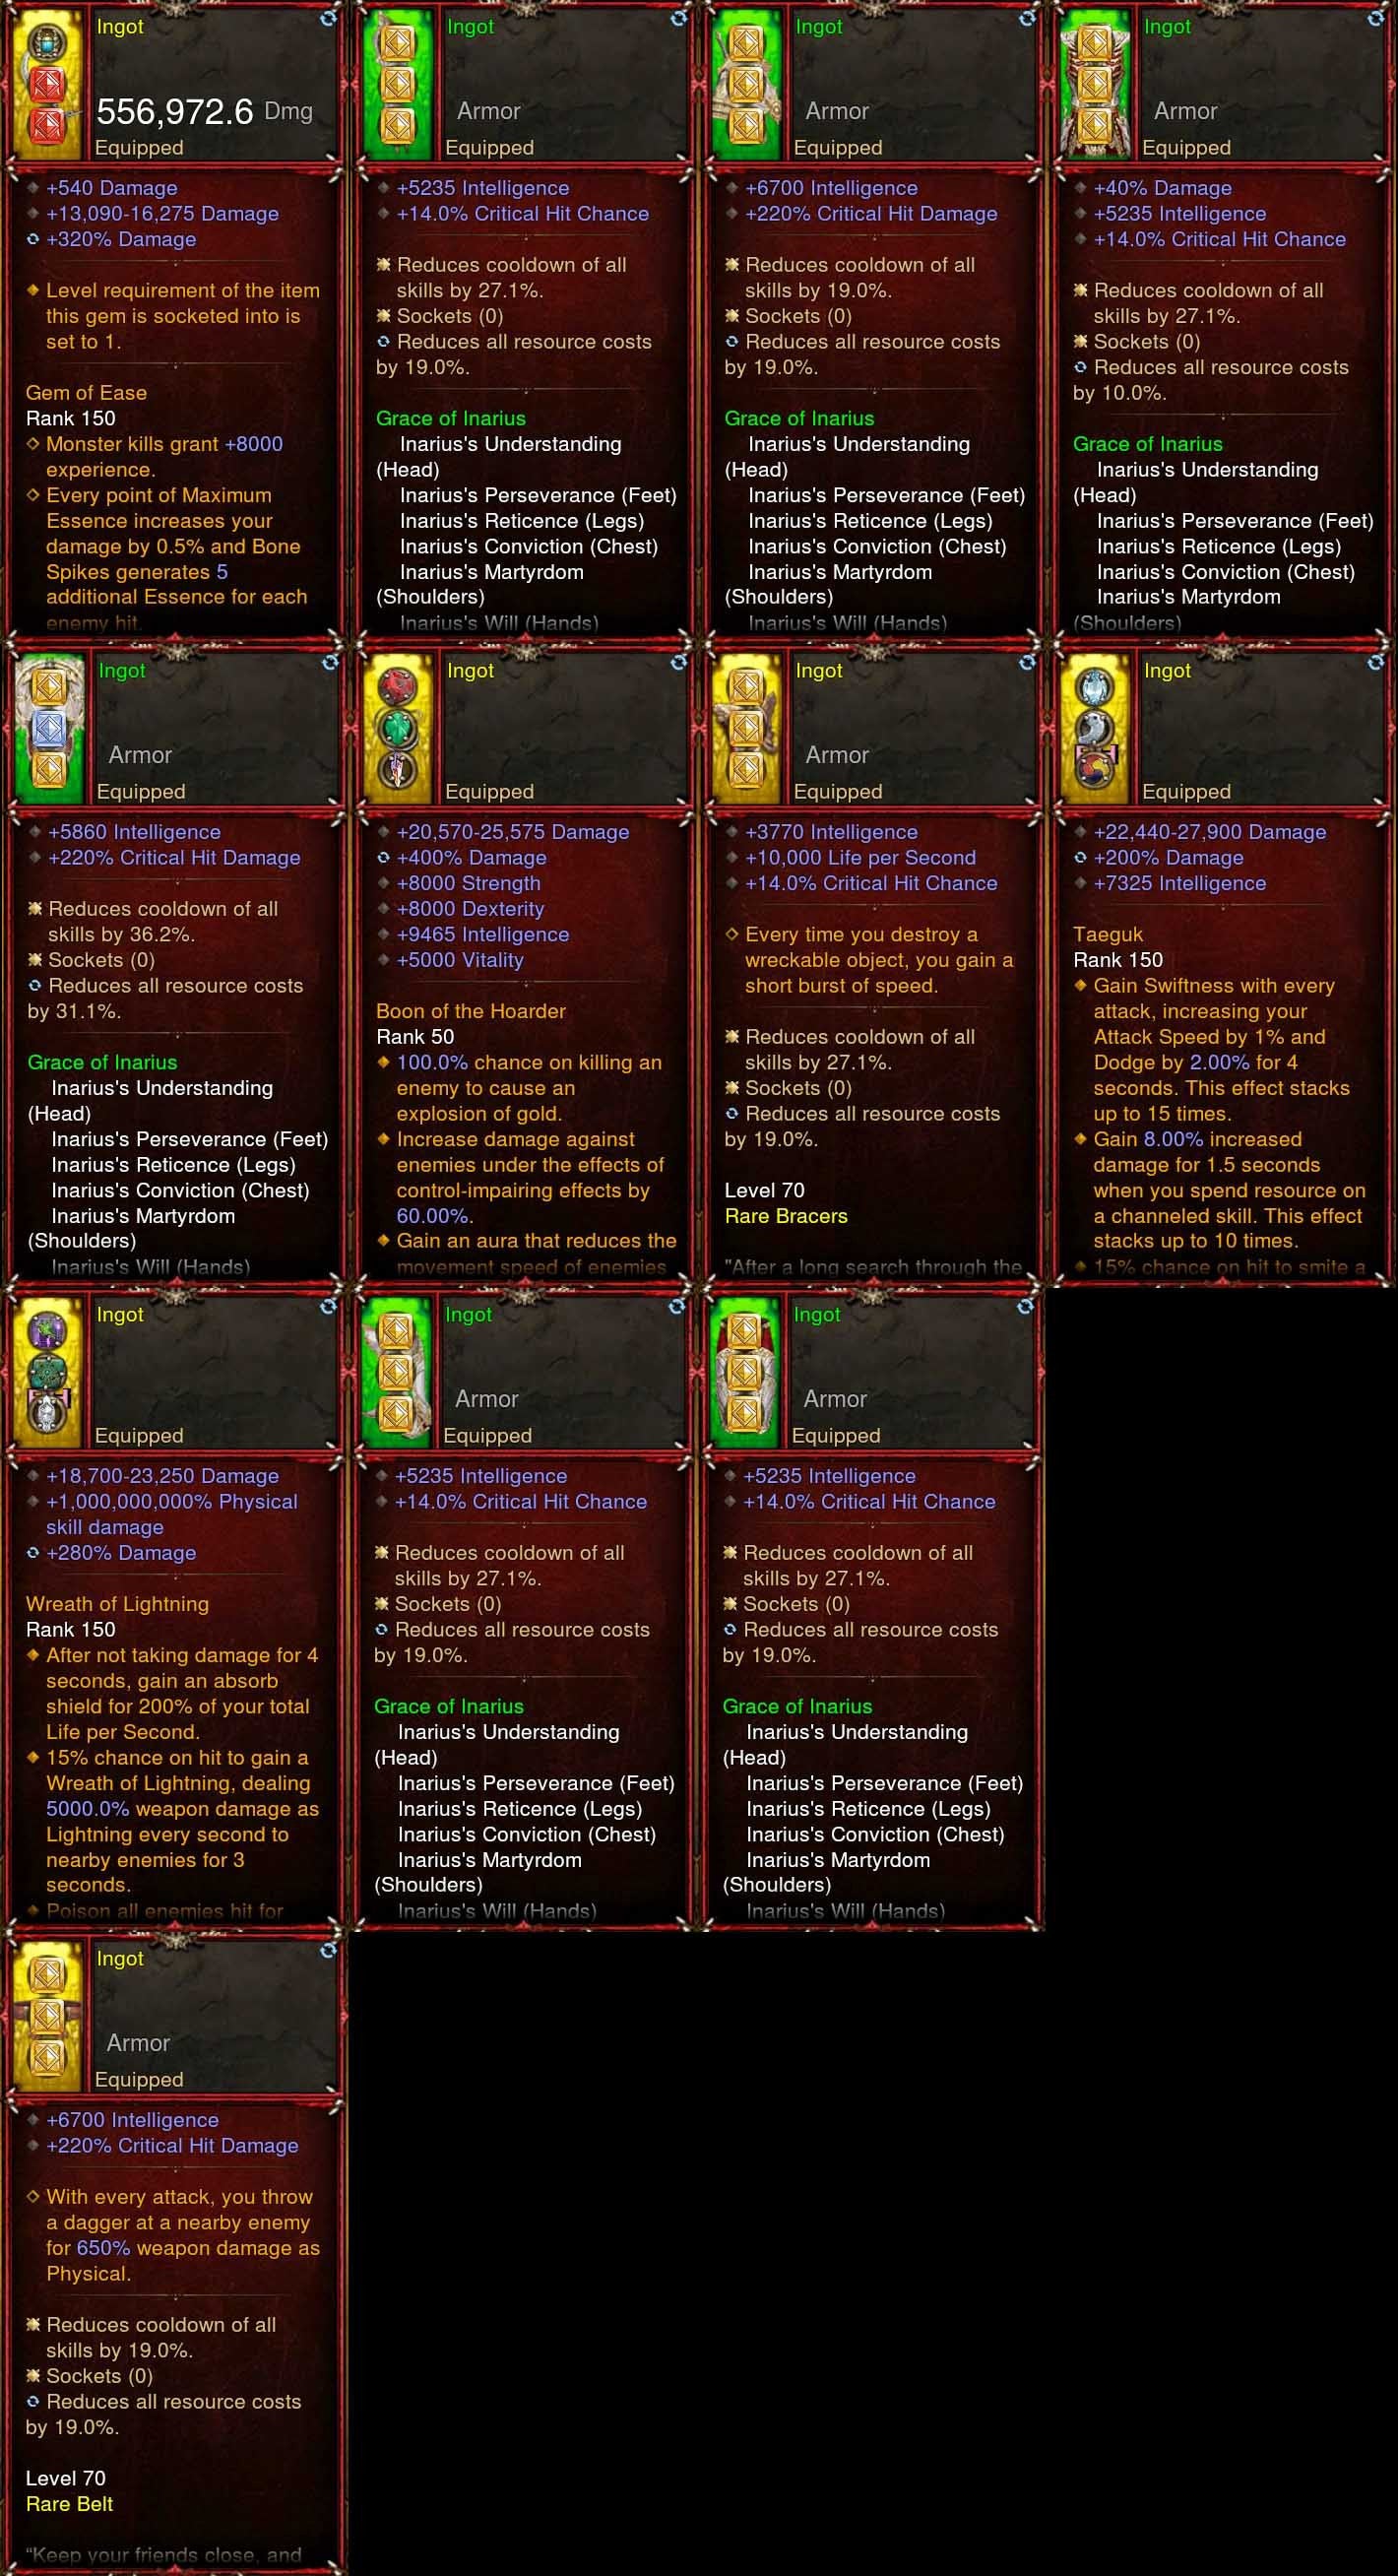 [Primal Ancient] Diablo 3 Immortal v5 Type-R Ingot Modded Necromancer Inarius Set Diablo 3 Mods ROS Seasonal and Non Seasonal Save Mod - Modded Items and Gear - Hacks - Cheats - Trainers for Playstation 4 - Playstation 5 - Nintendo Switch - Xbox One